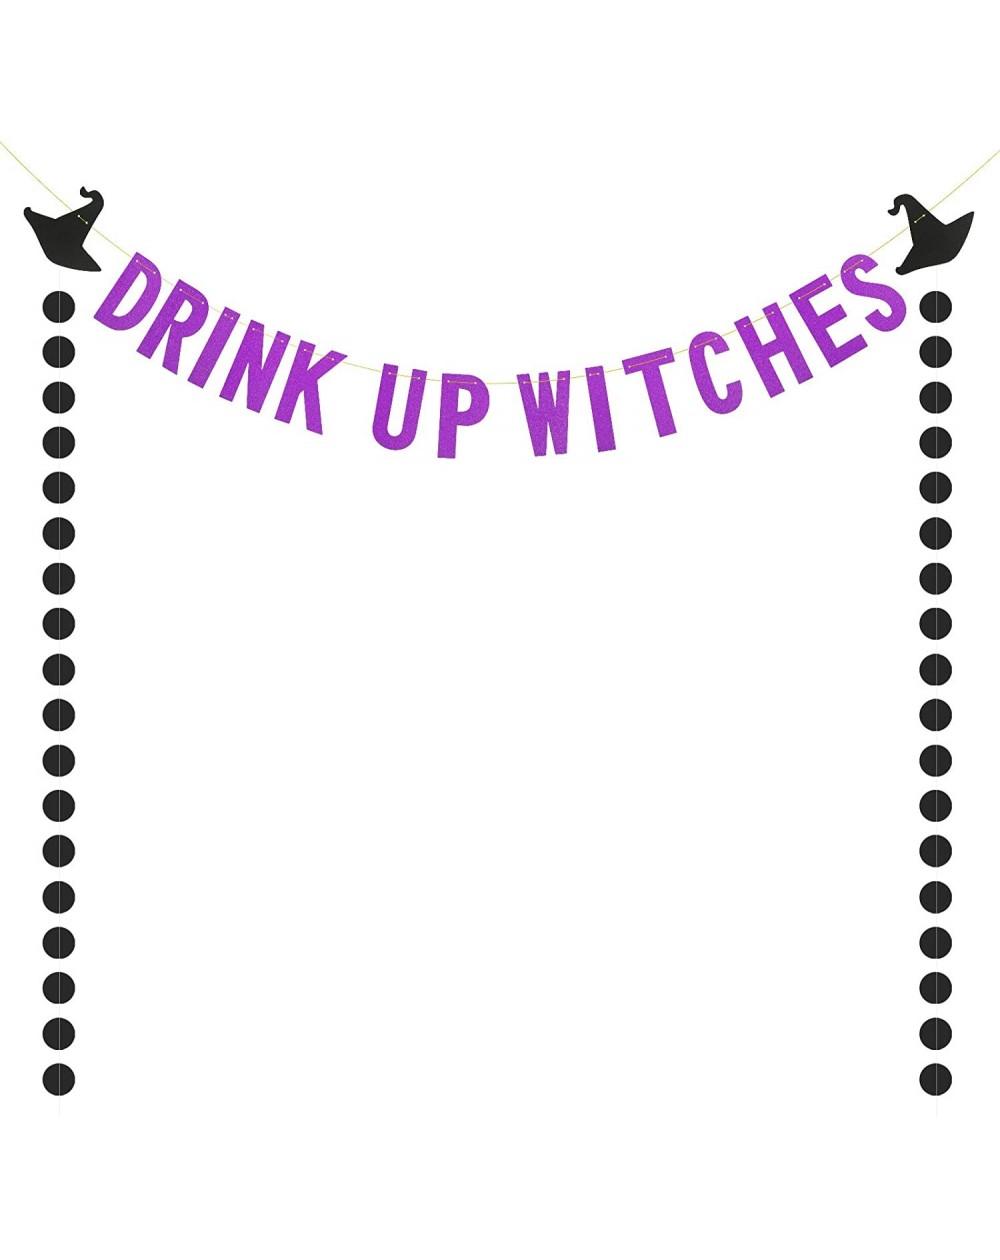 Banners & Garlands Drink UP Witches-Drink Up Witches Banner Purple Glitter Halloween Garland Decor Bunting with 2pcs Black Ci...